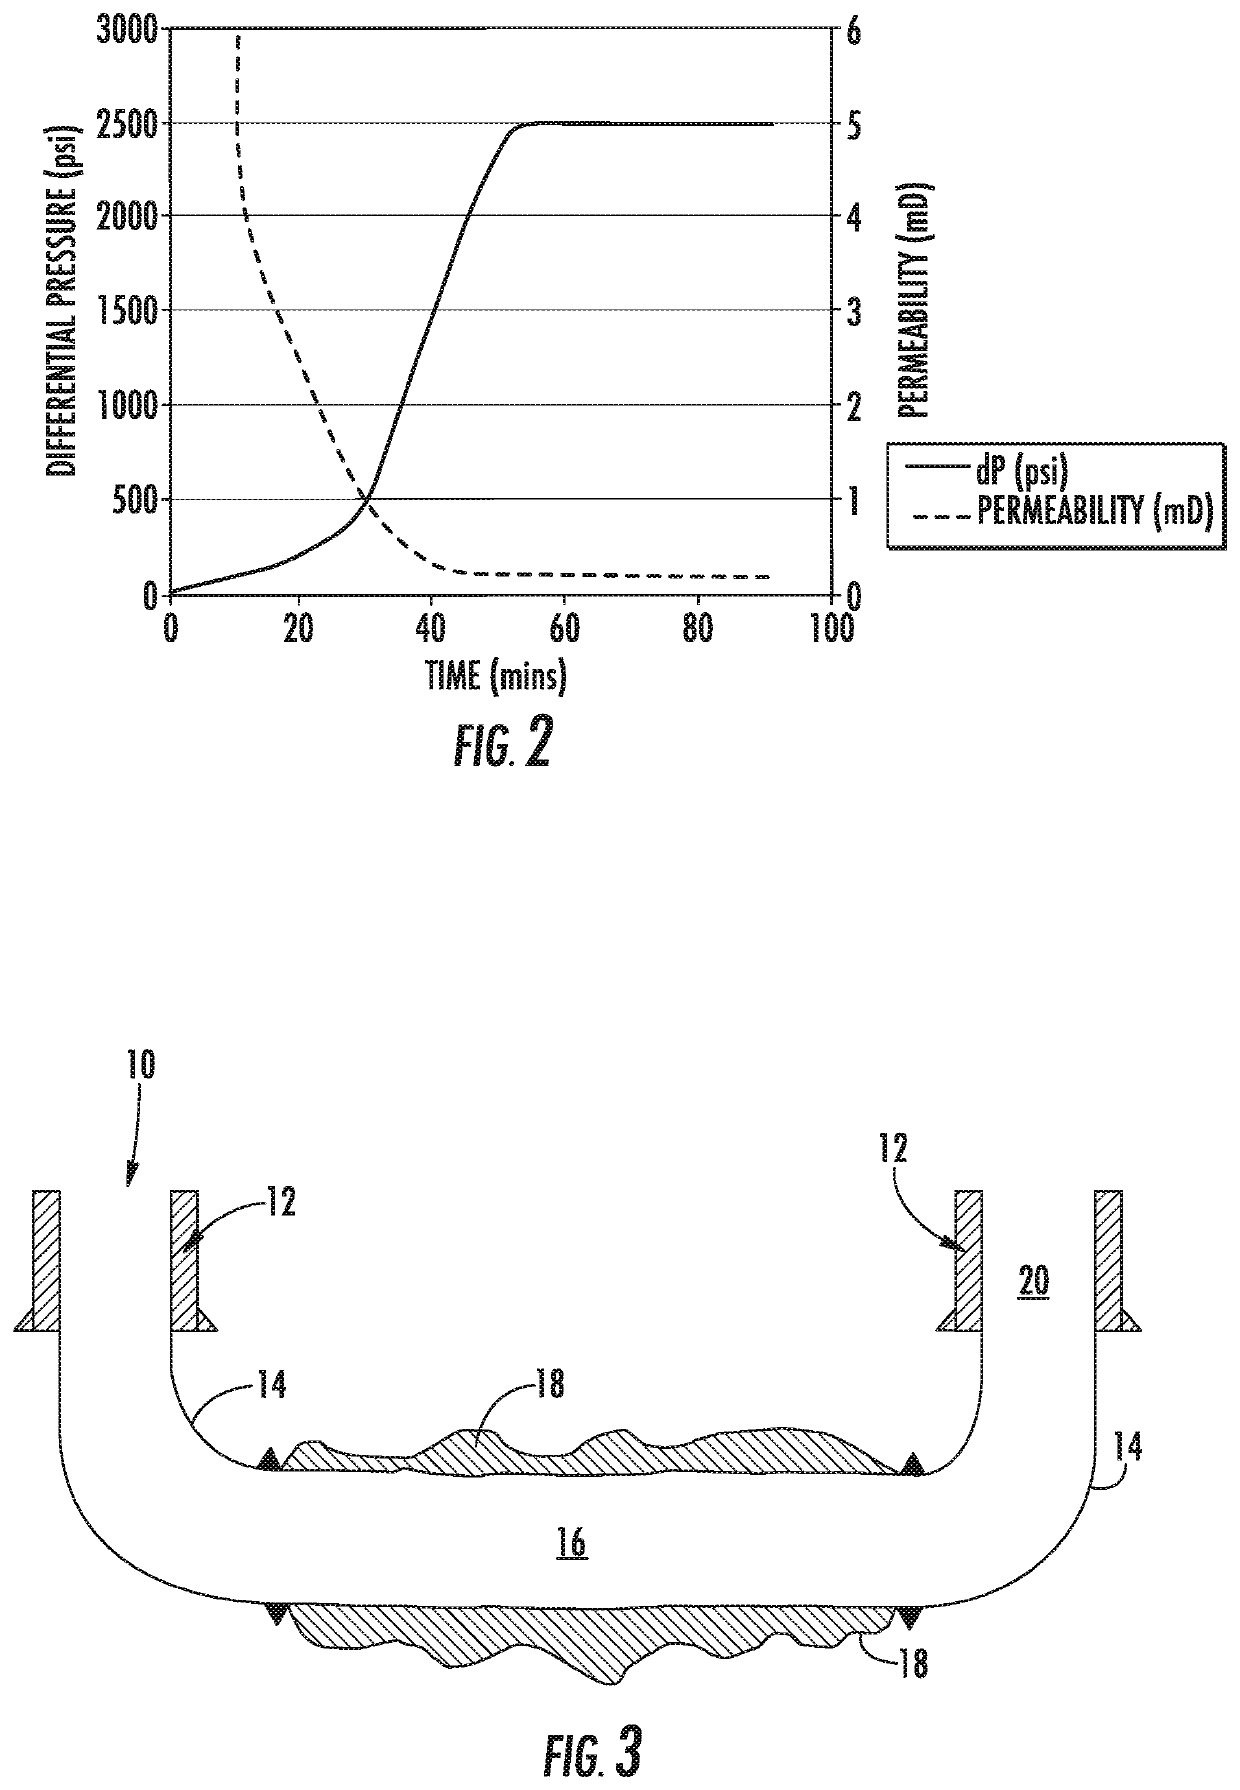 Operational protocol for harvesting a thermally productive formation